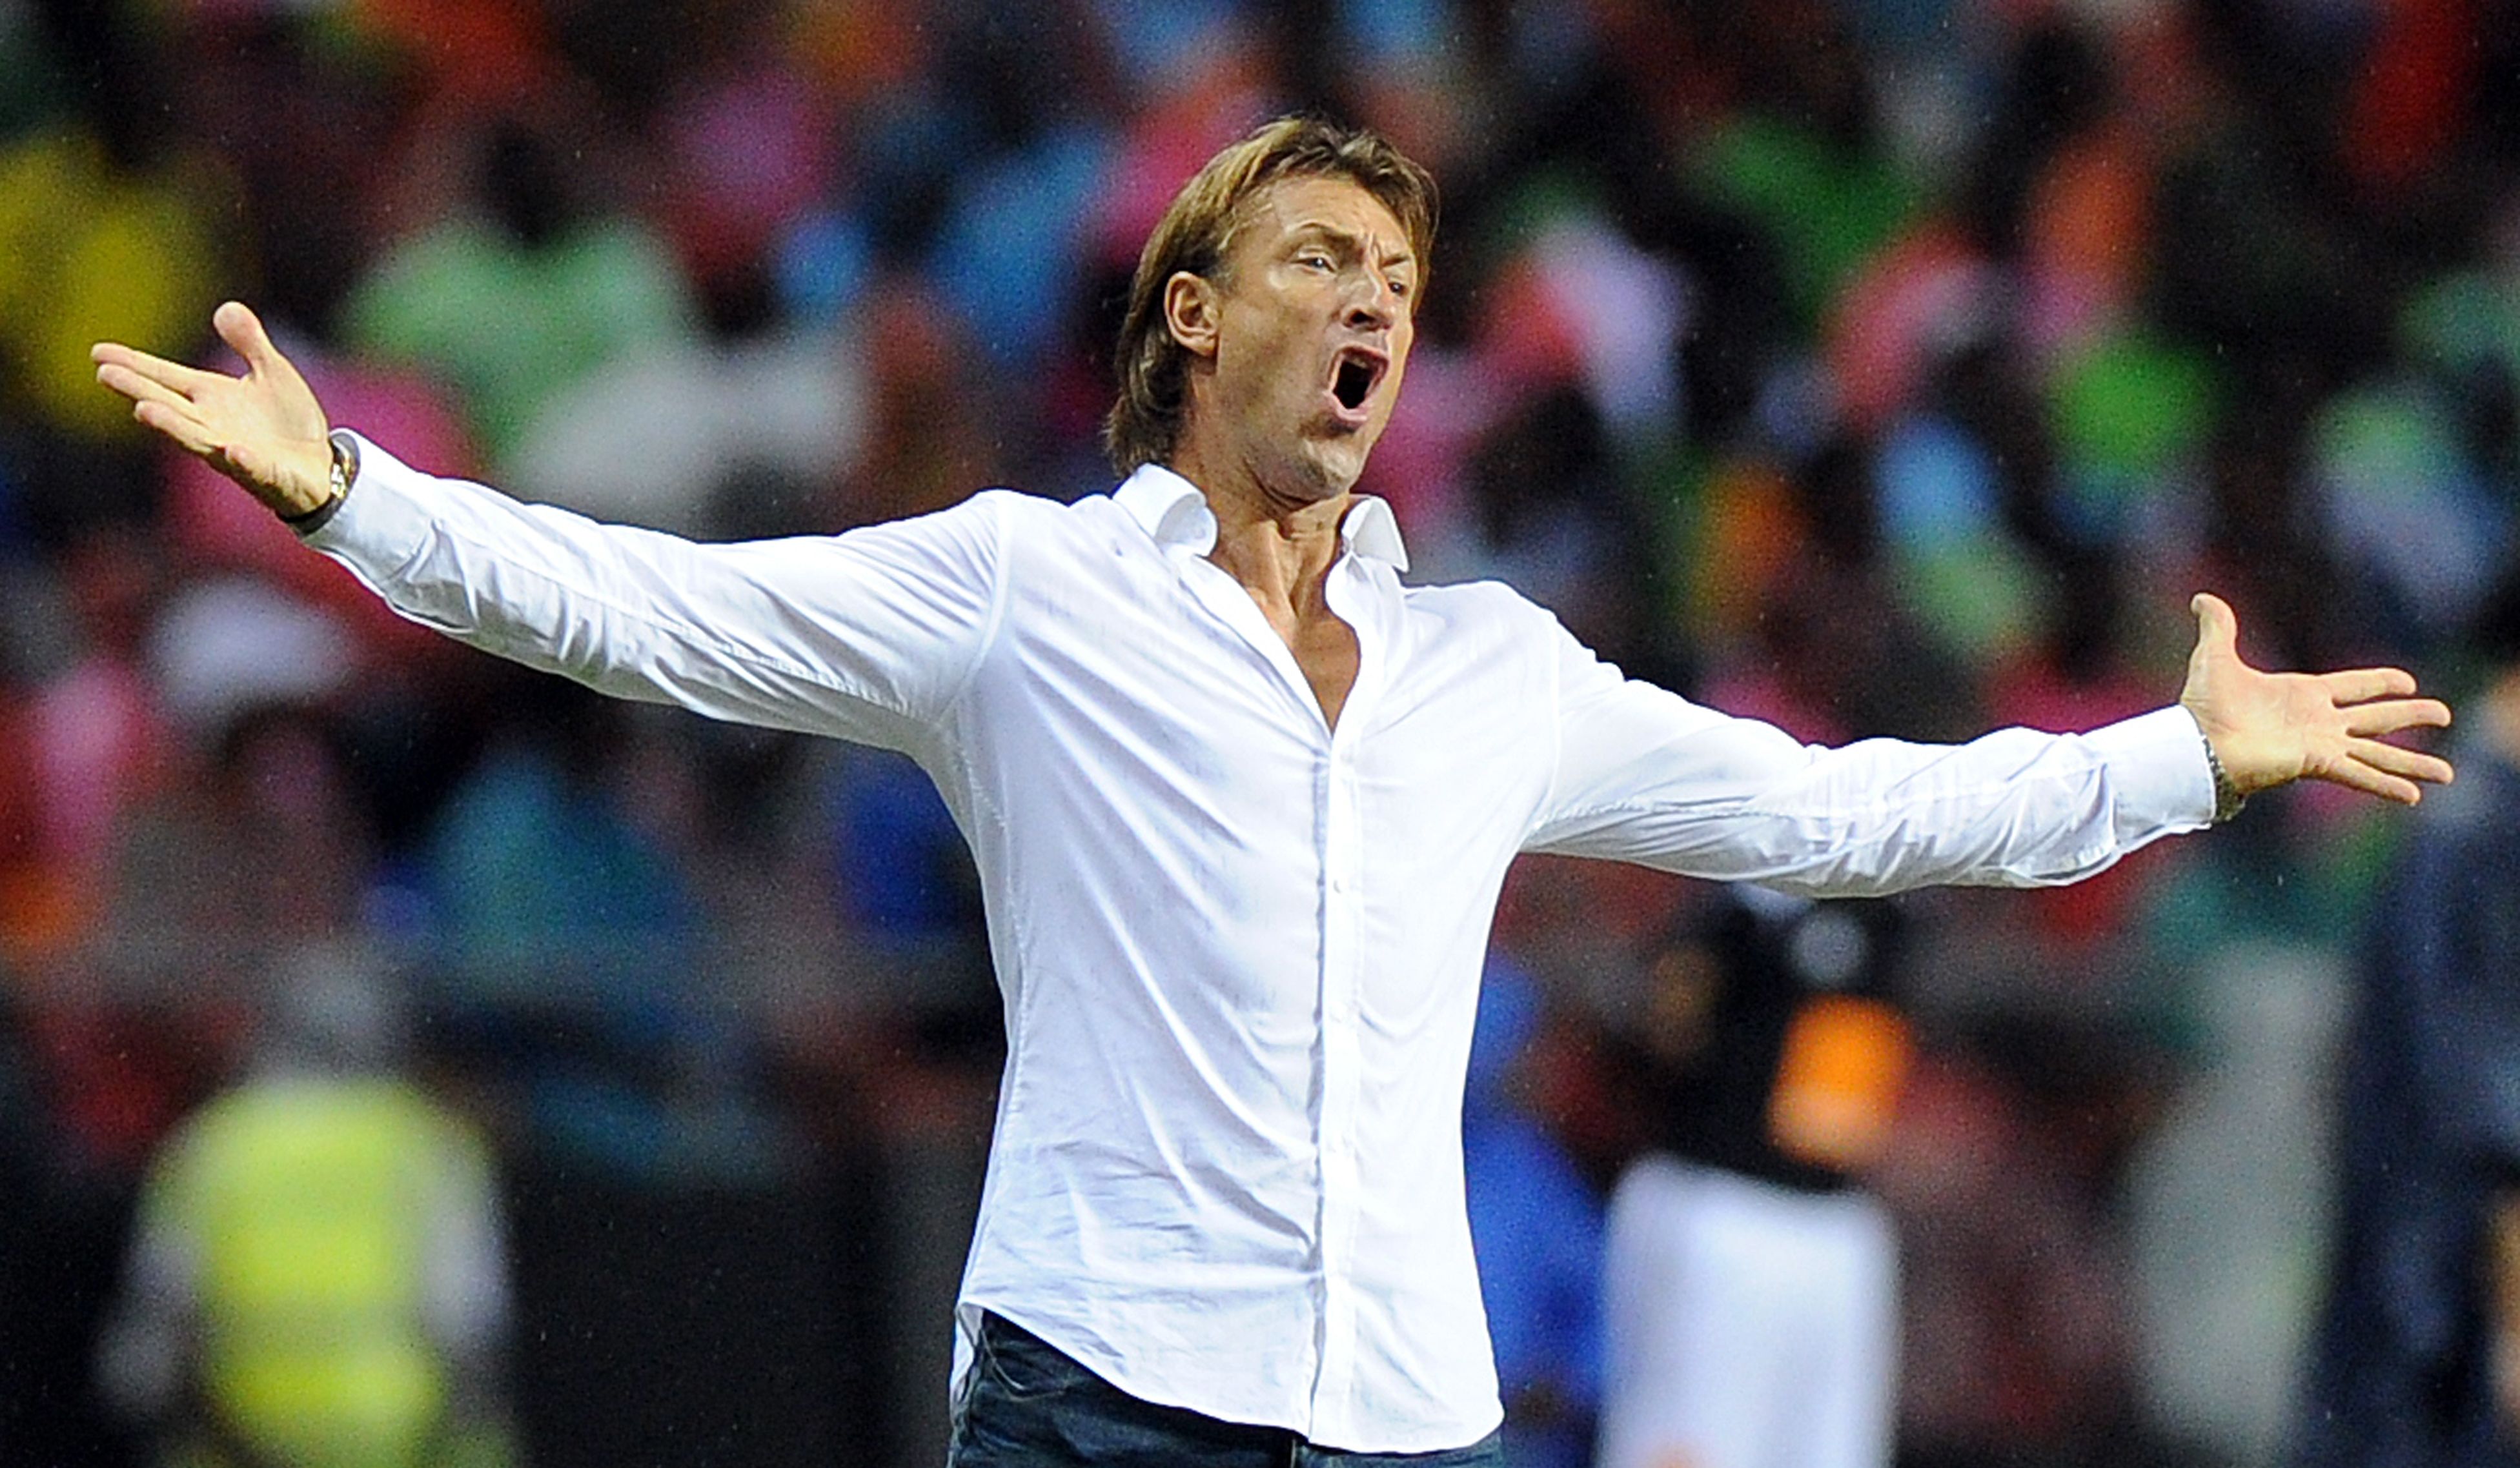 Lusaka News - Herve Renard with his beautiful family. Show some